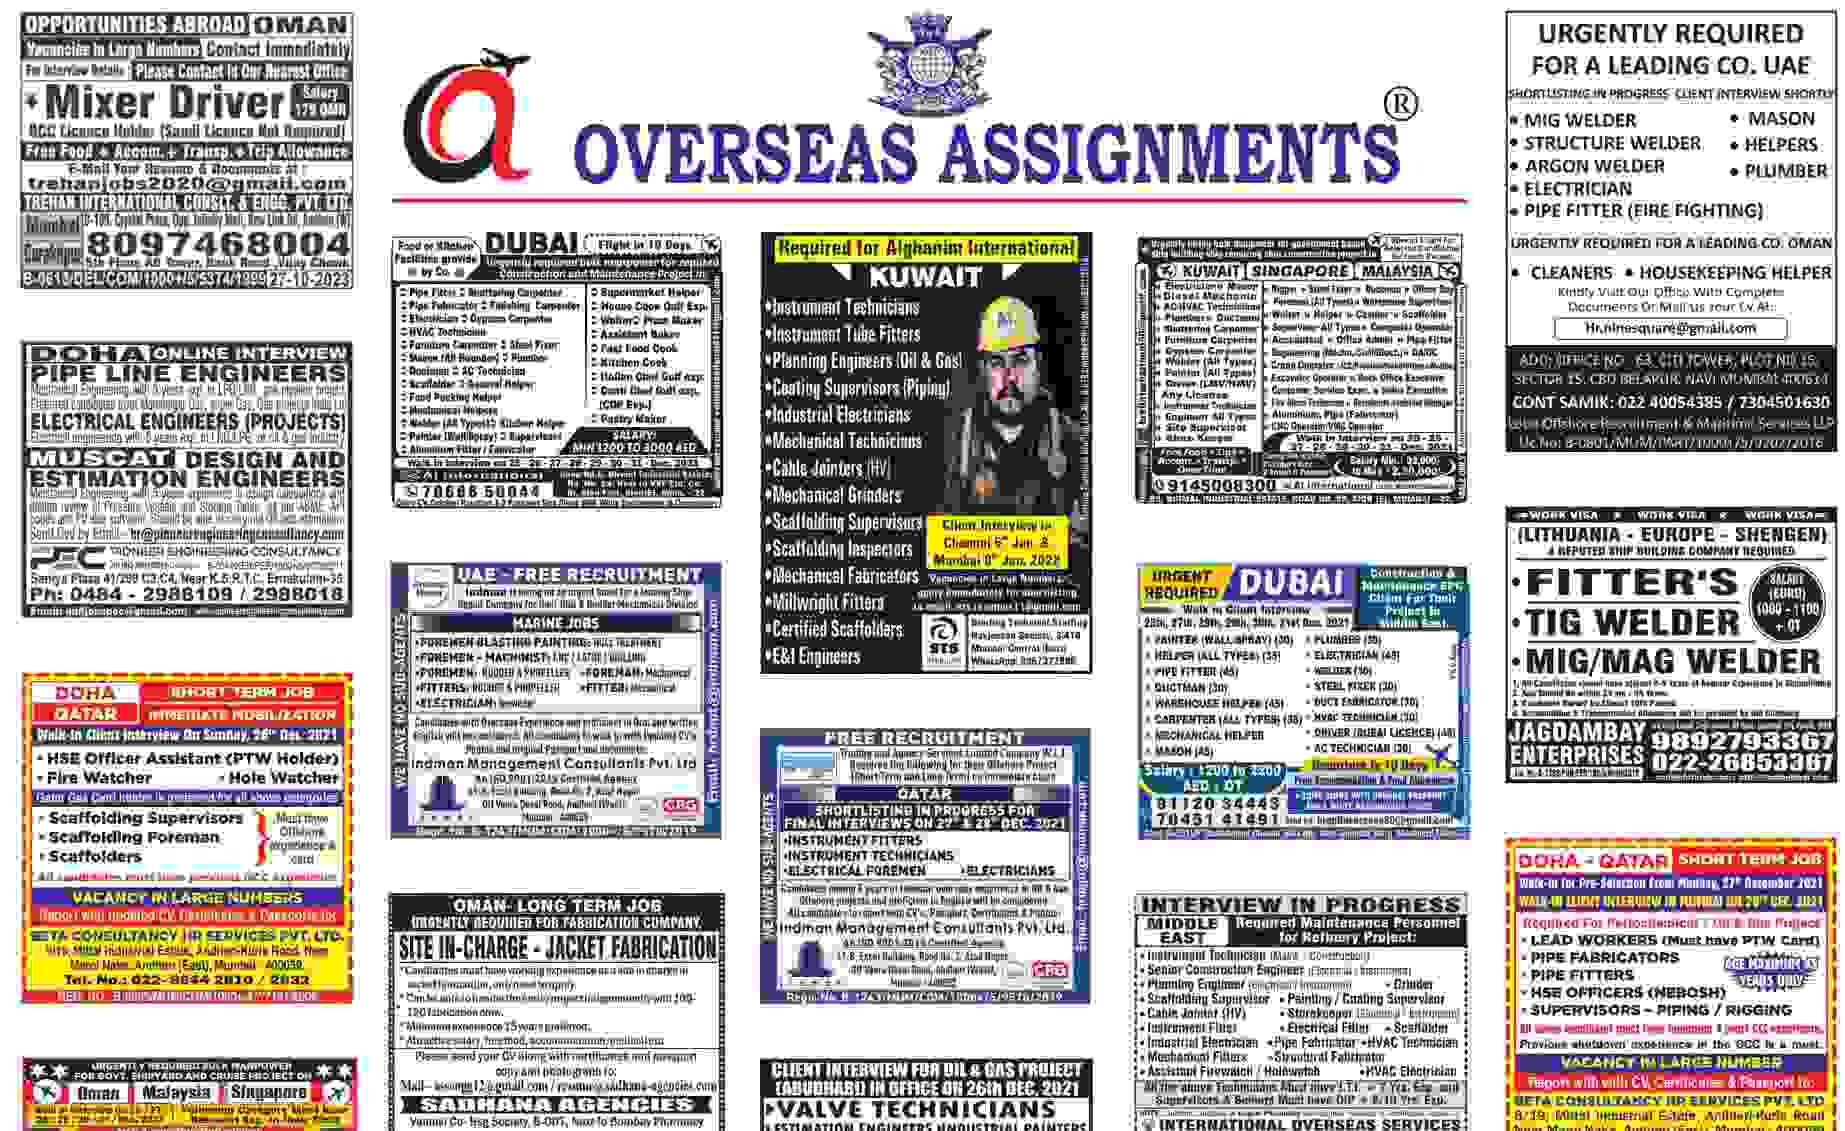 assignment abroad times pdf today 2022 free download mumbai